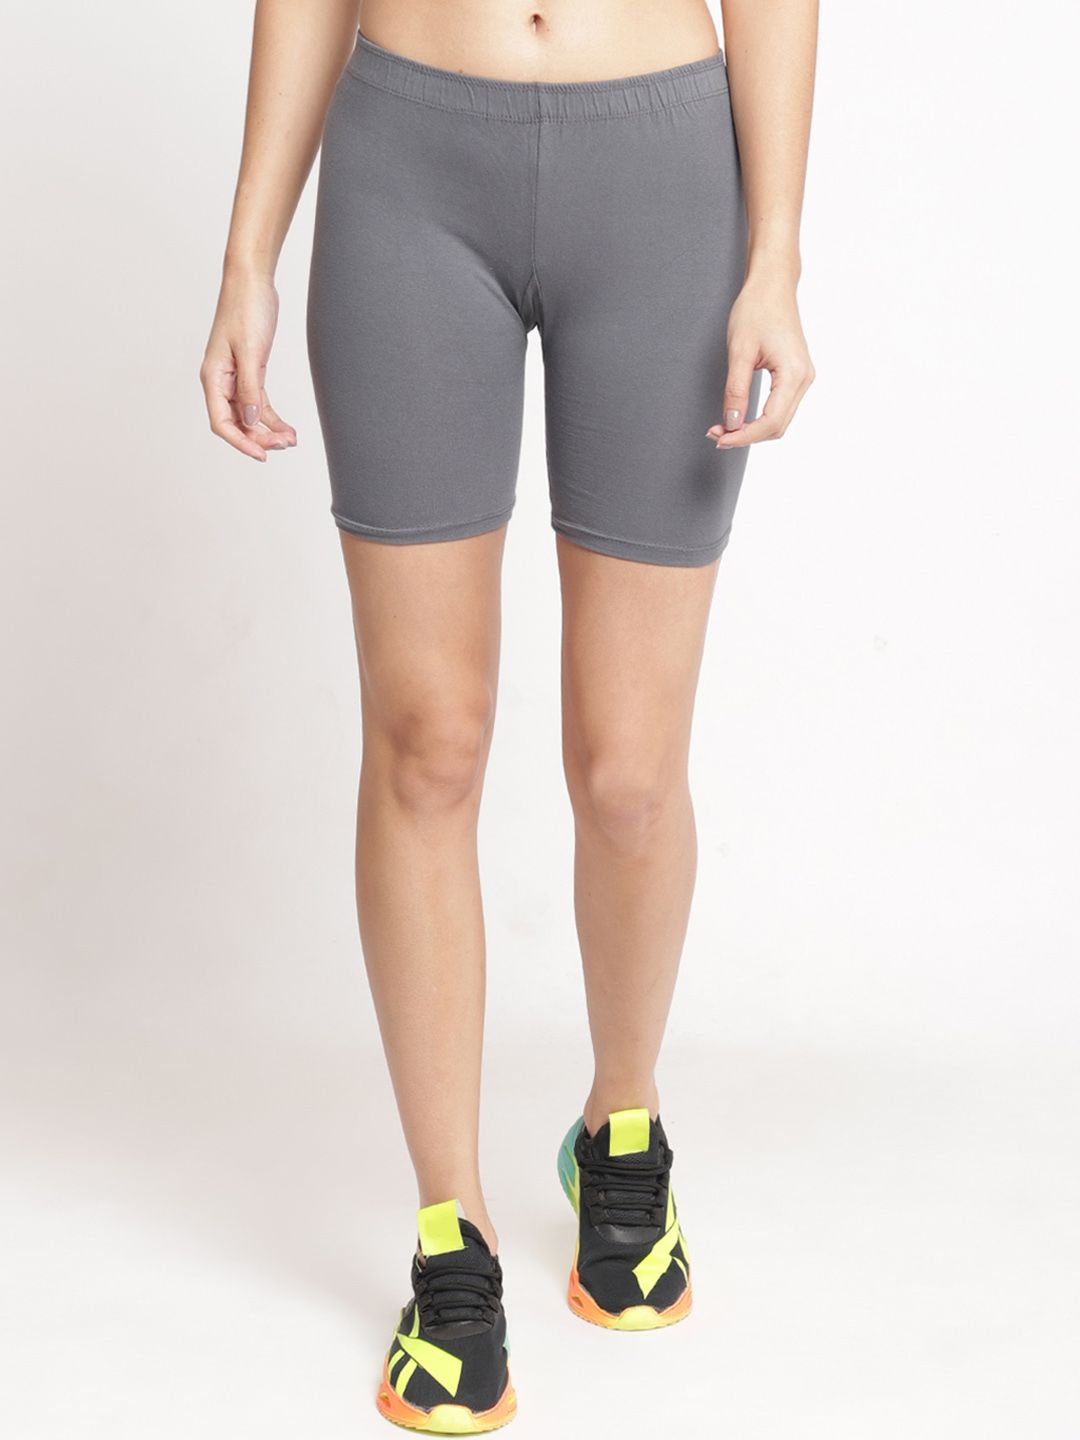 Jinfo Women Cycling Cotton Sports Shorts Price in India